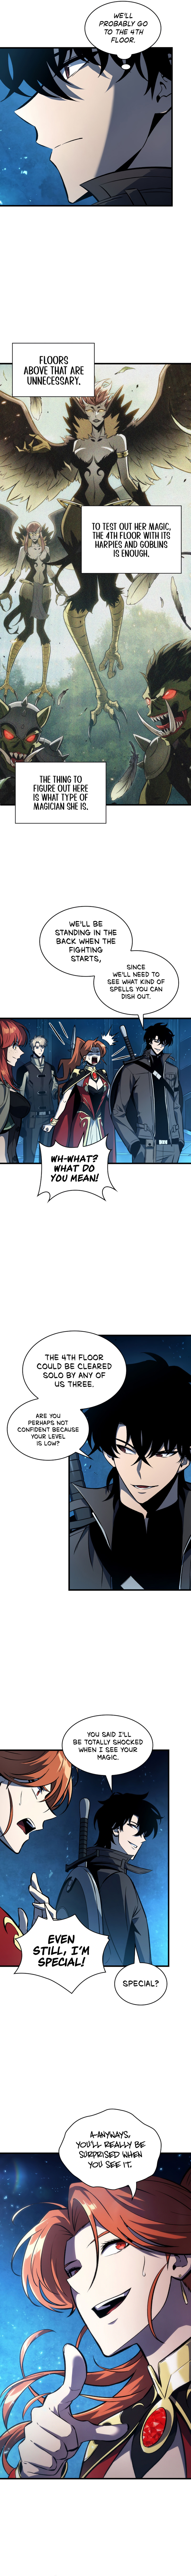 Pick Me Up - Chapter 21 Page 4